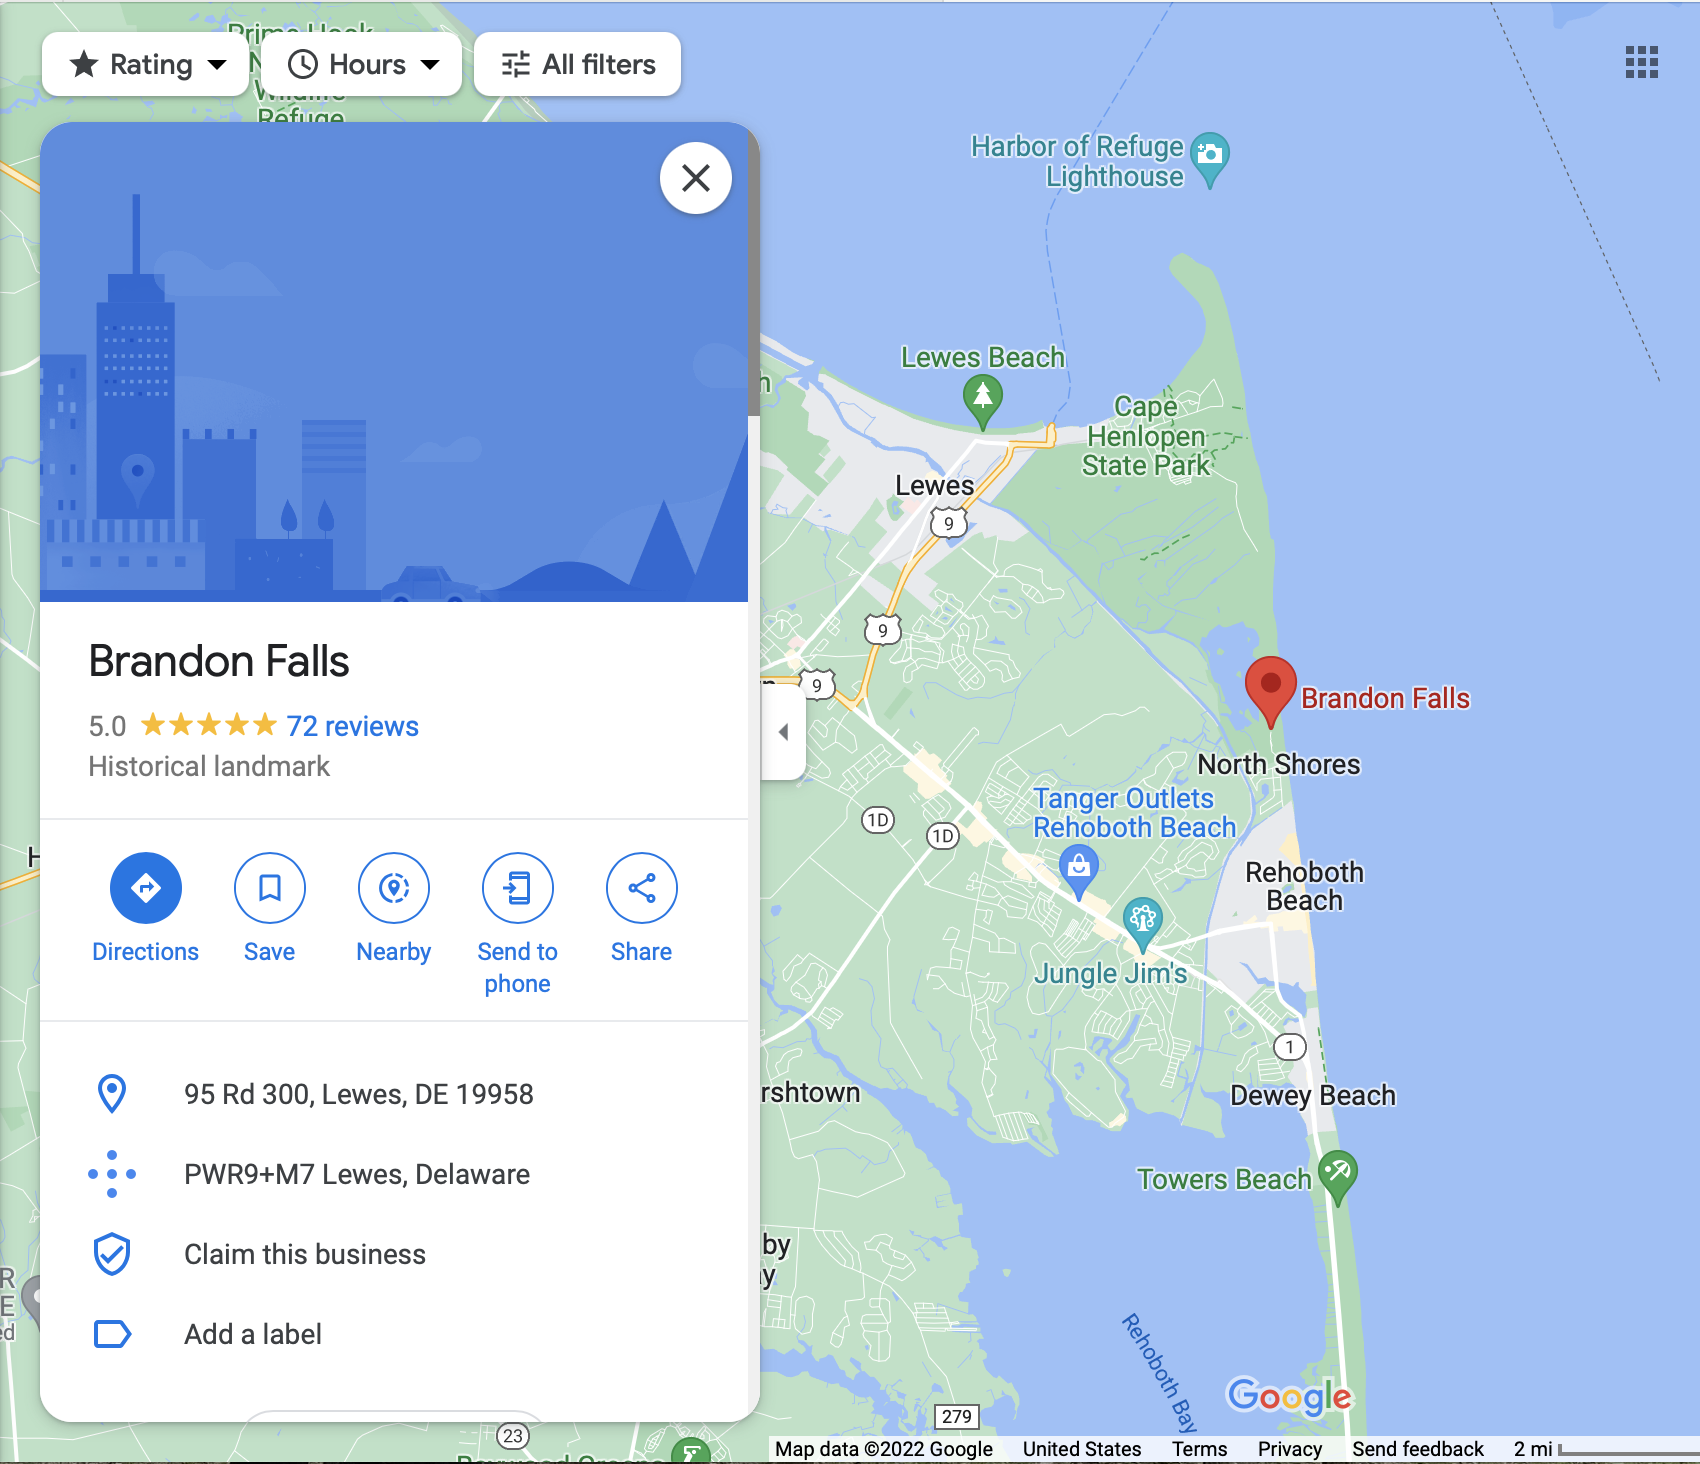 Screenshot taken of Google Maps search results for "Brandon Falls" on June 19 at 8:35am. 